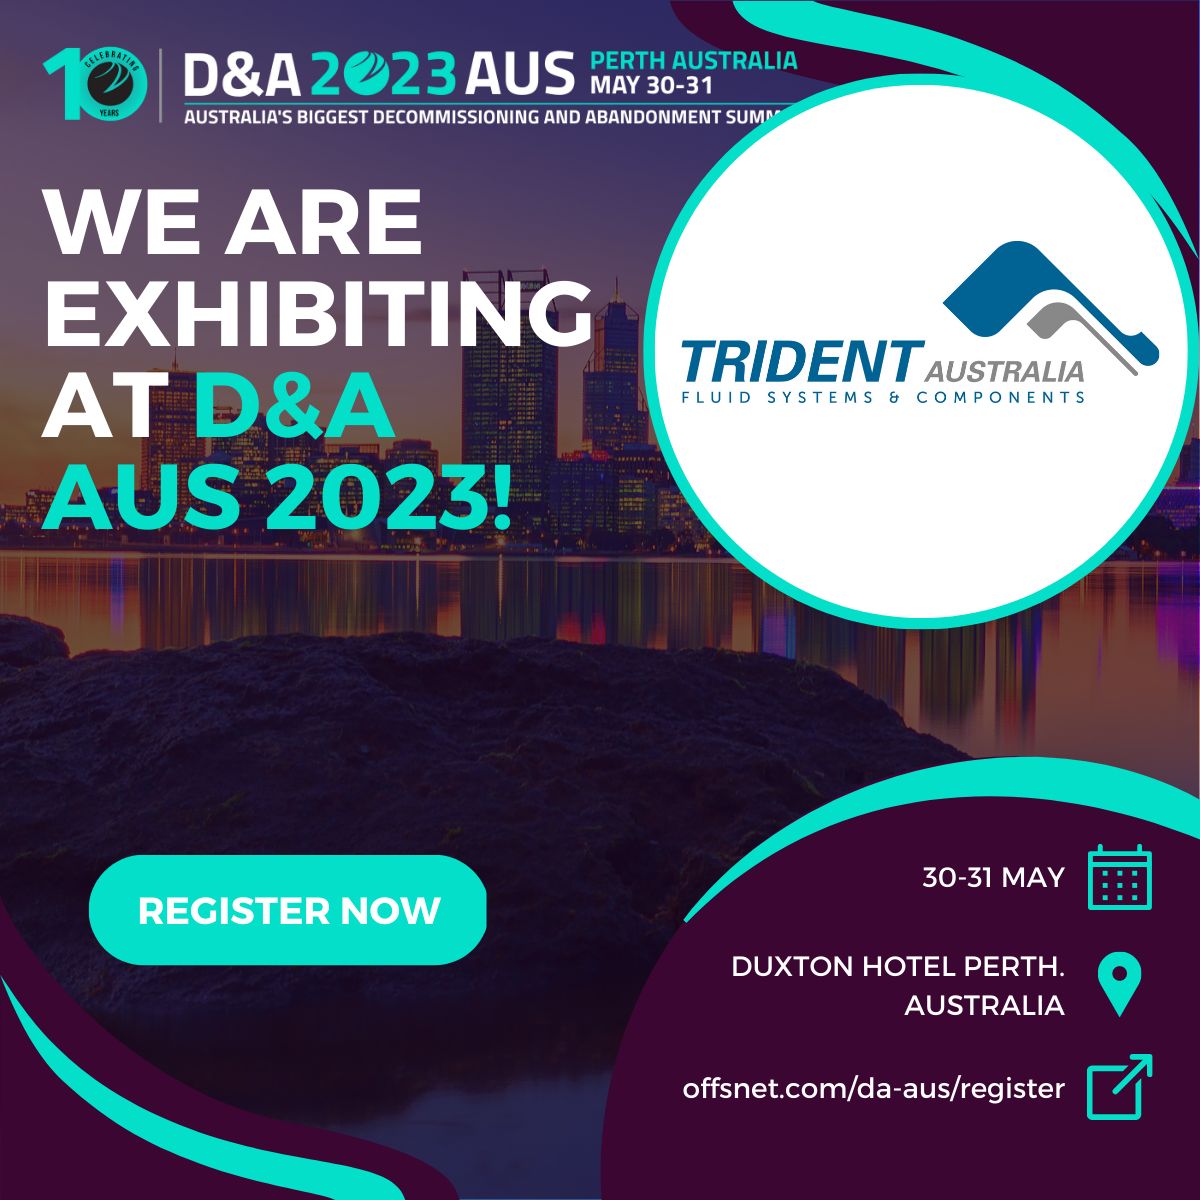 We're exhibiting at D&A AUS 2023!